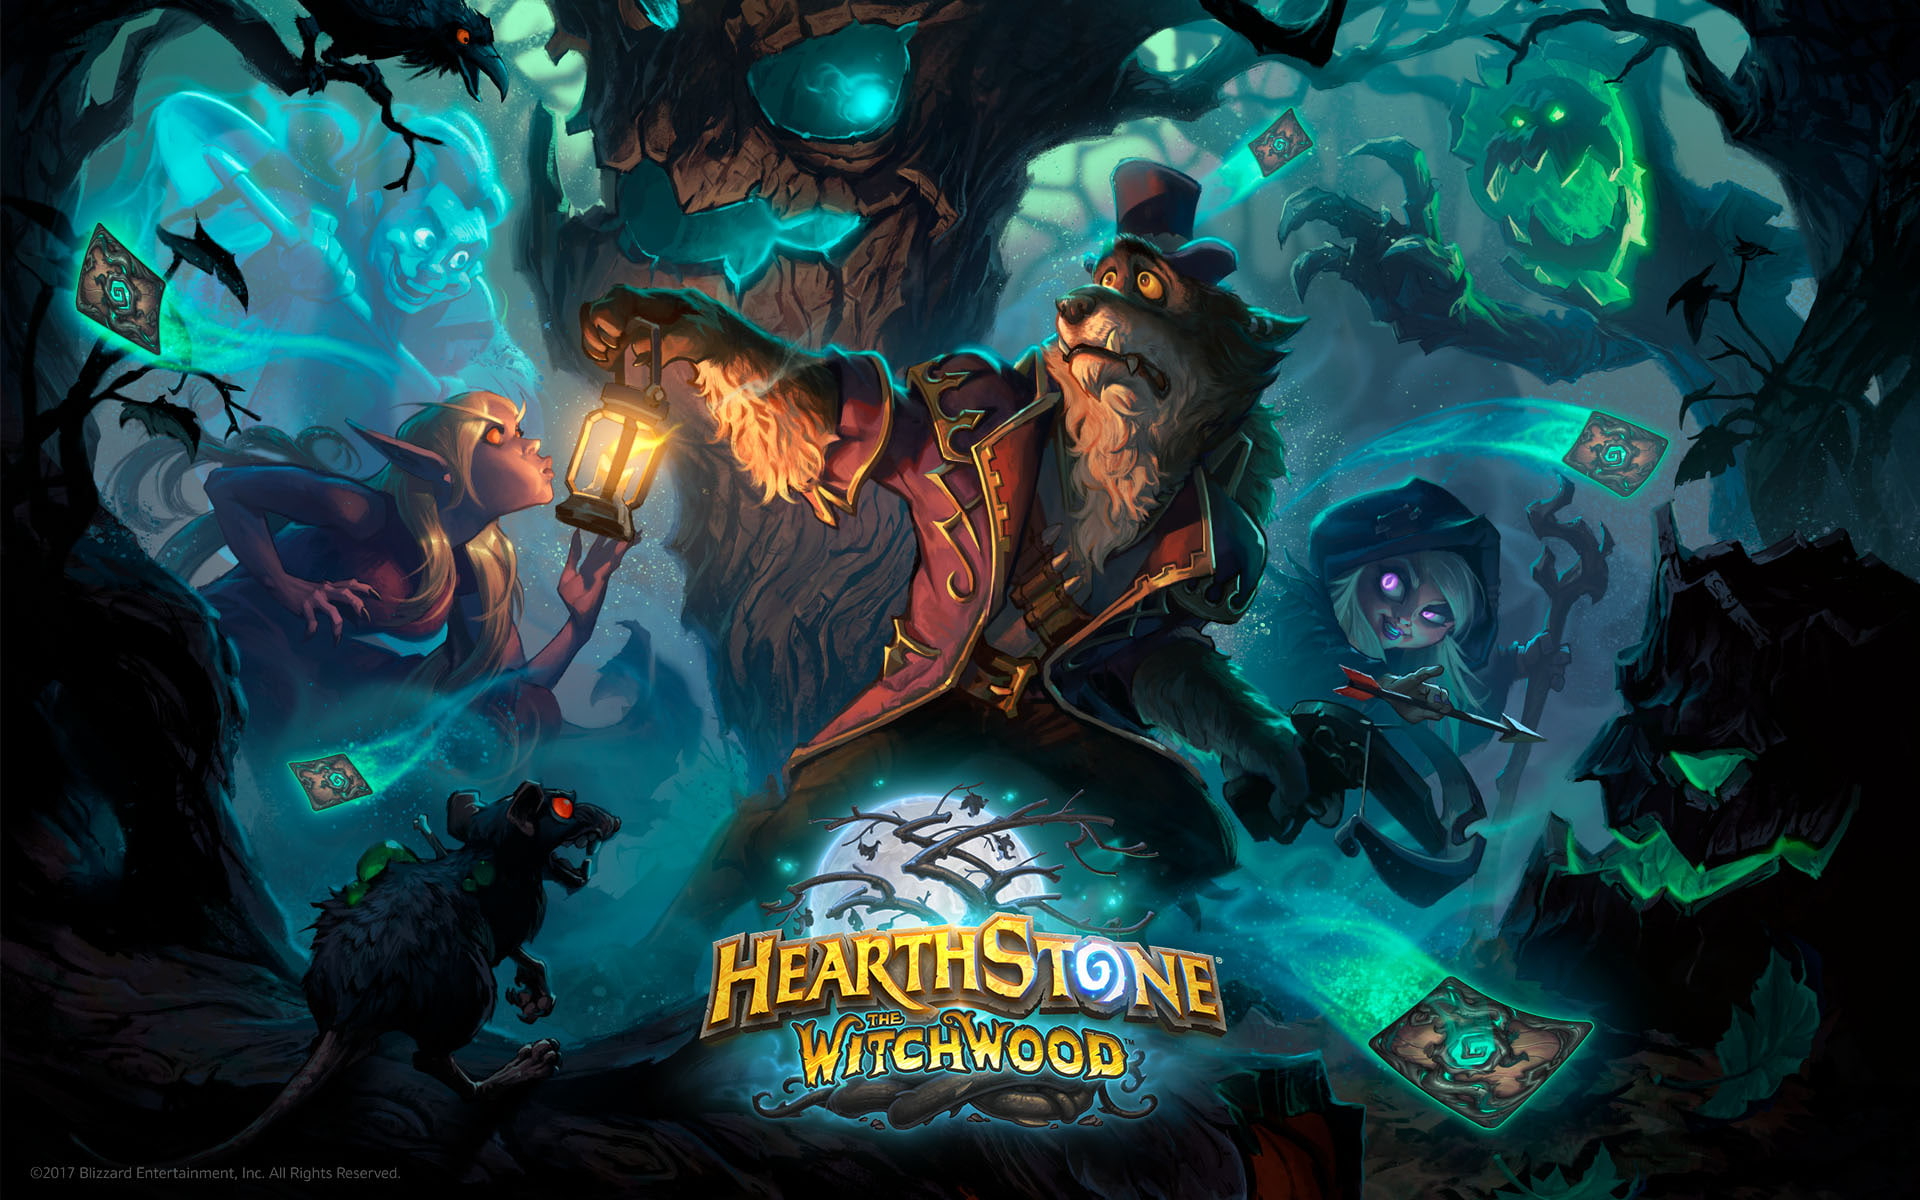 Wallpaper The Witchwood Hearthstone, Hearthstone Wallpaper, Game